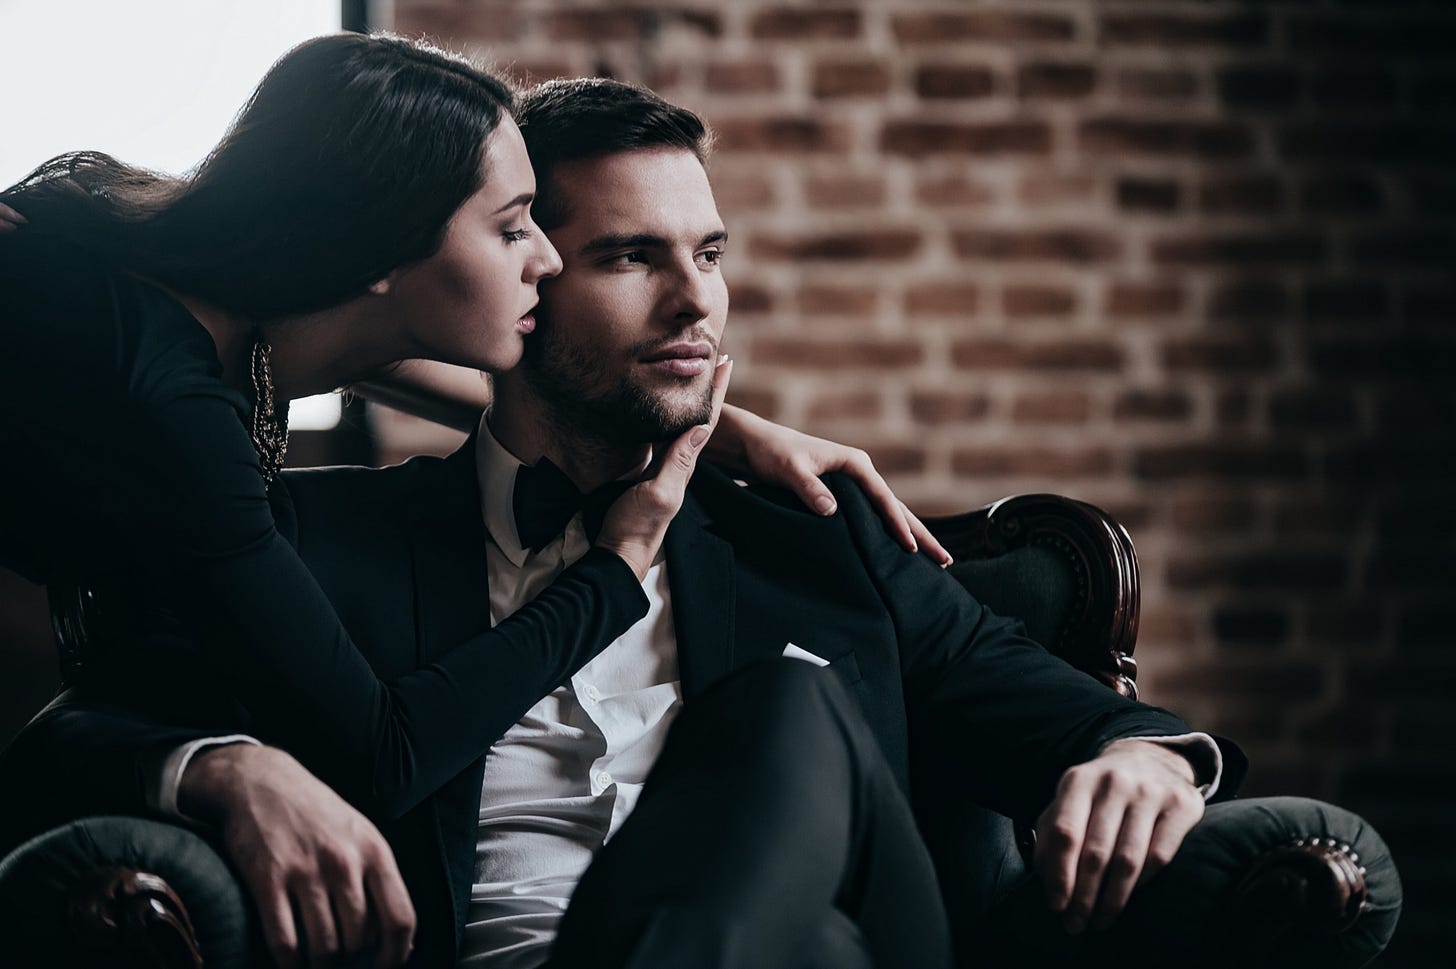 A woman dressed in black leans in closely and whispers in a man’s ear.